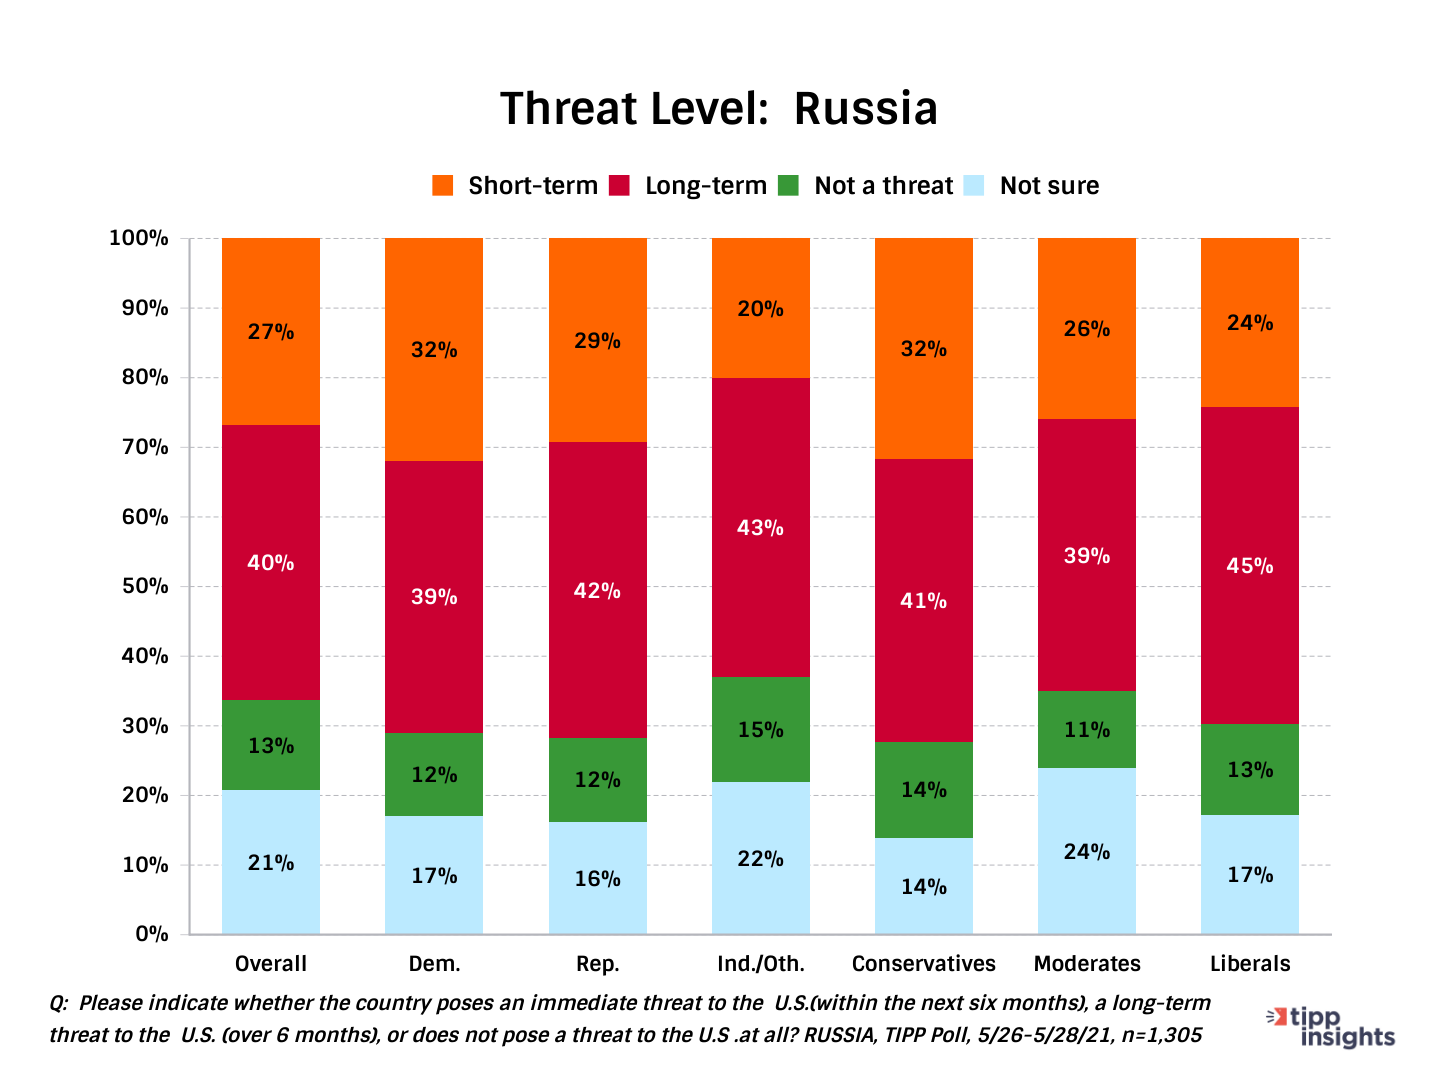 TIPP Poll Asking Americans About Perception Of Threat From Russia - Chart